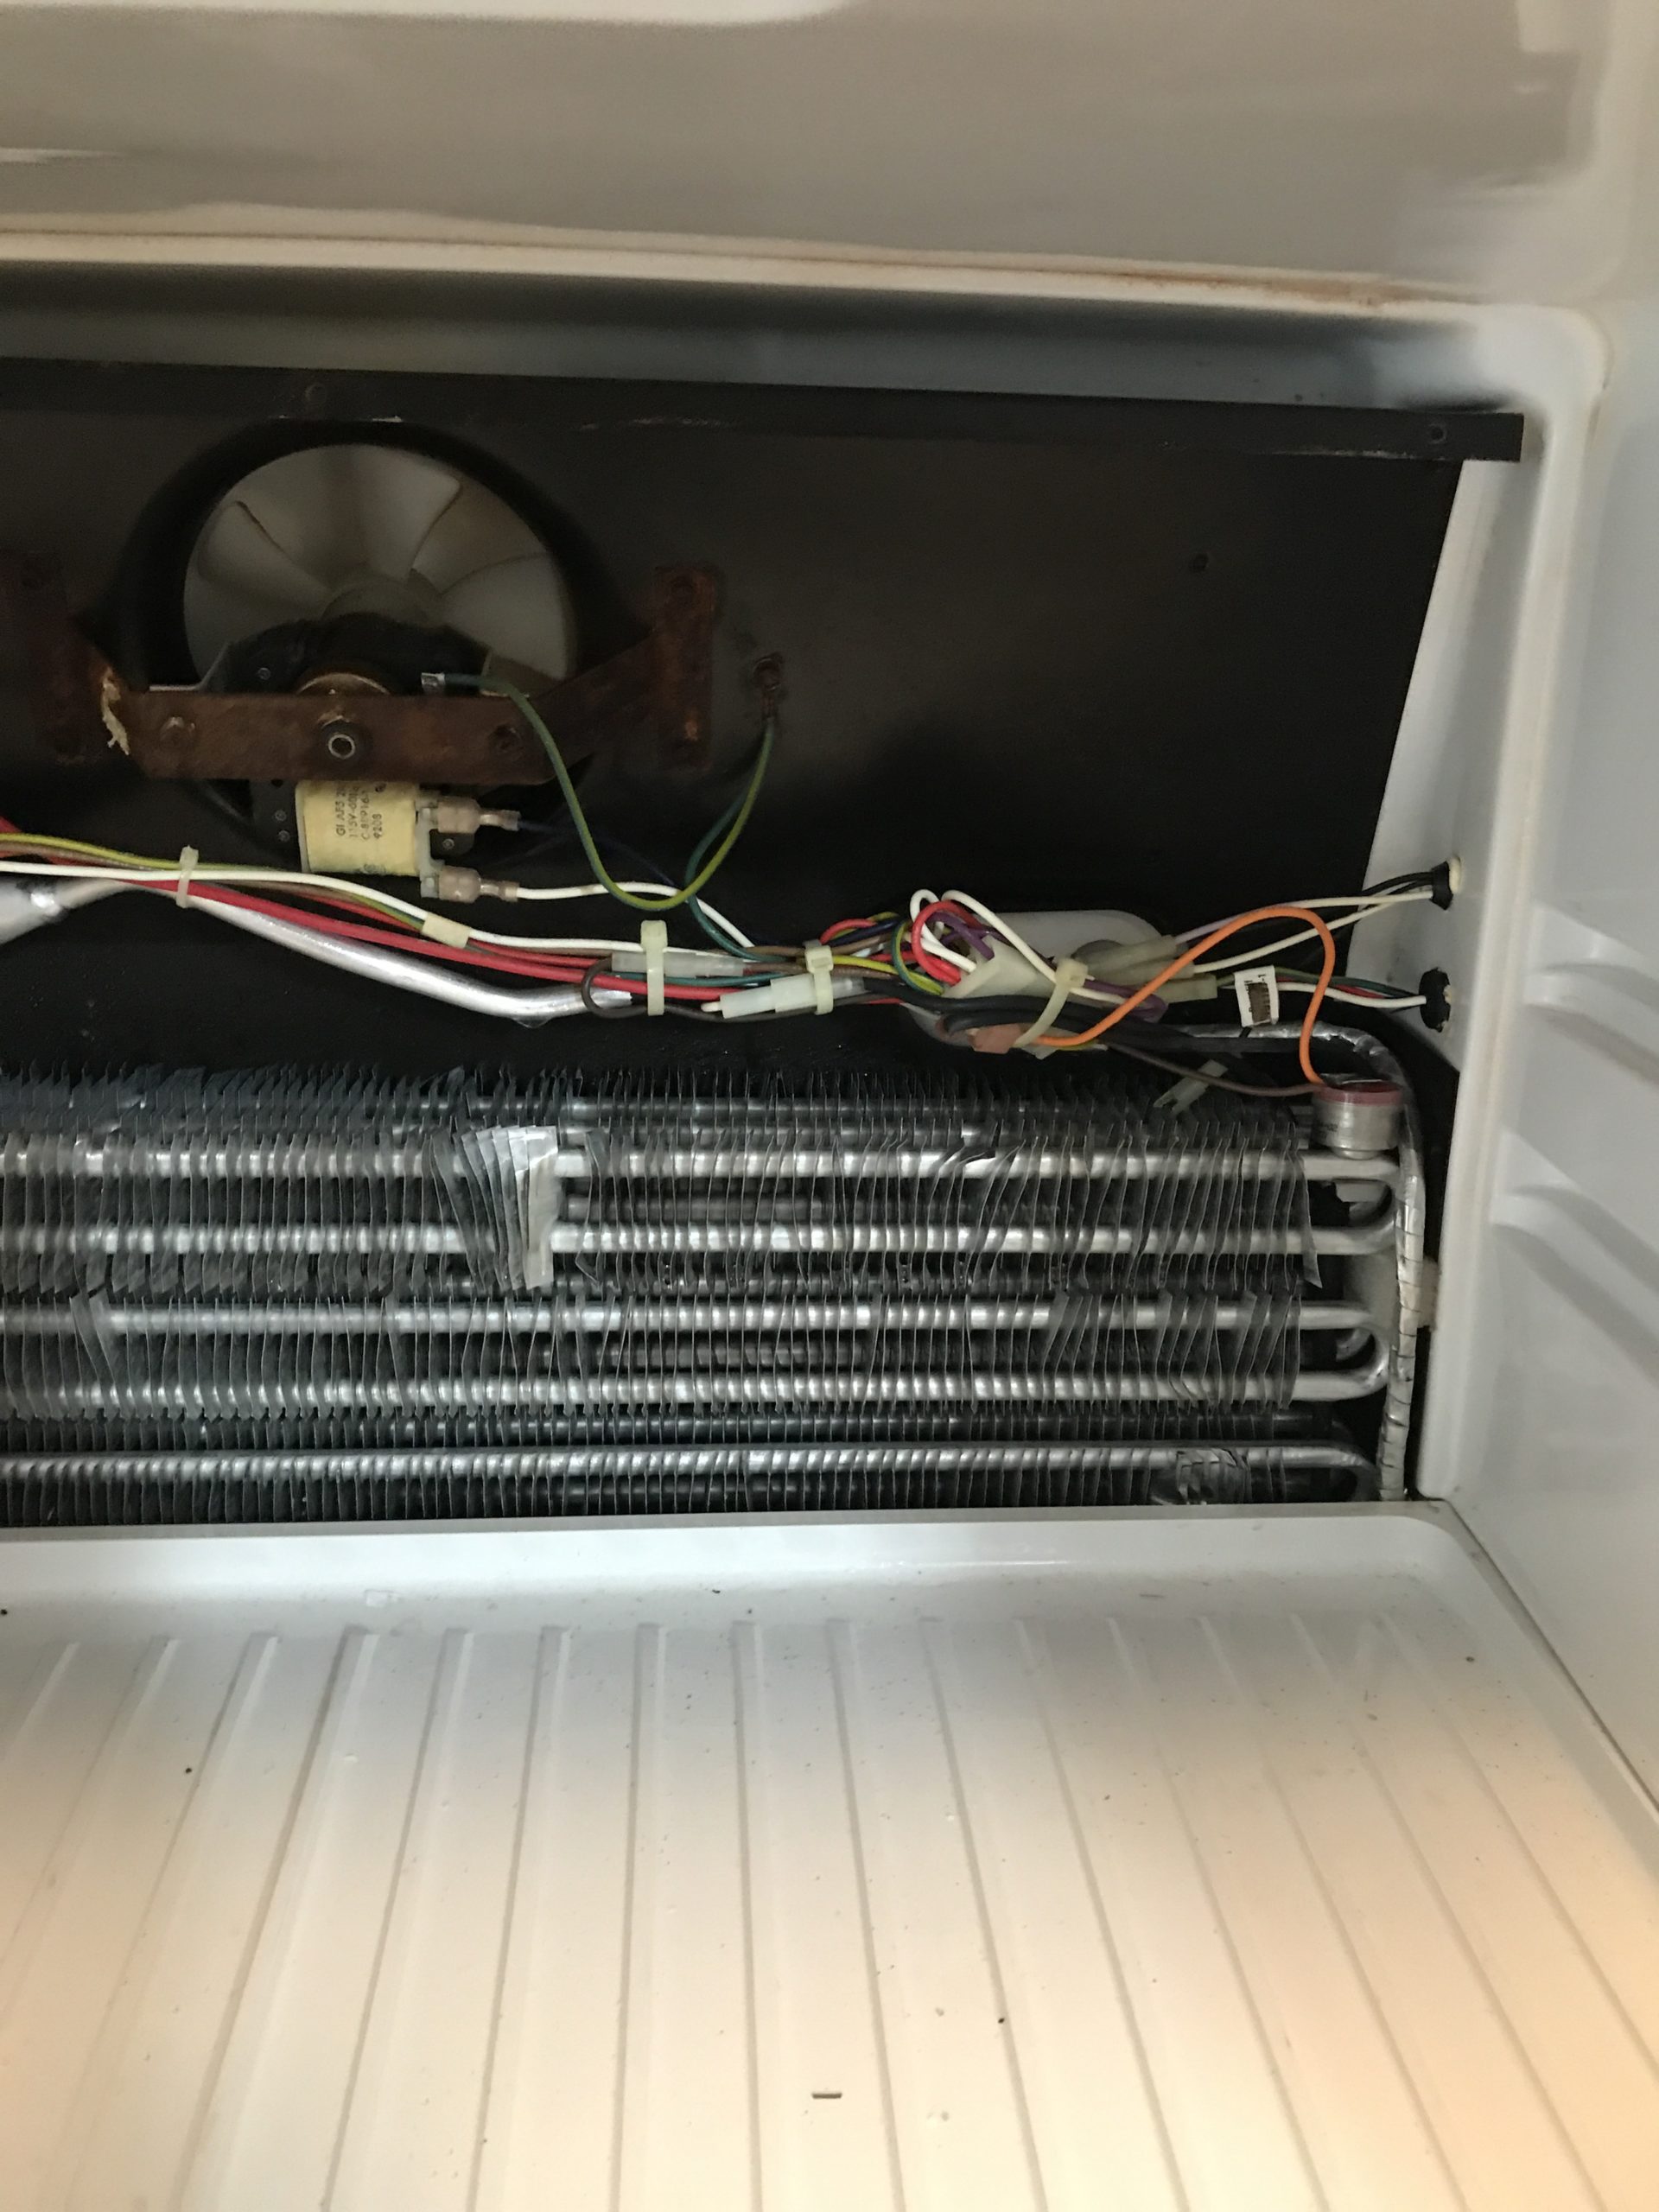 Where is the defrost drain in my freezer?